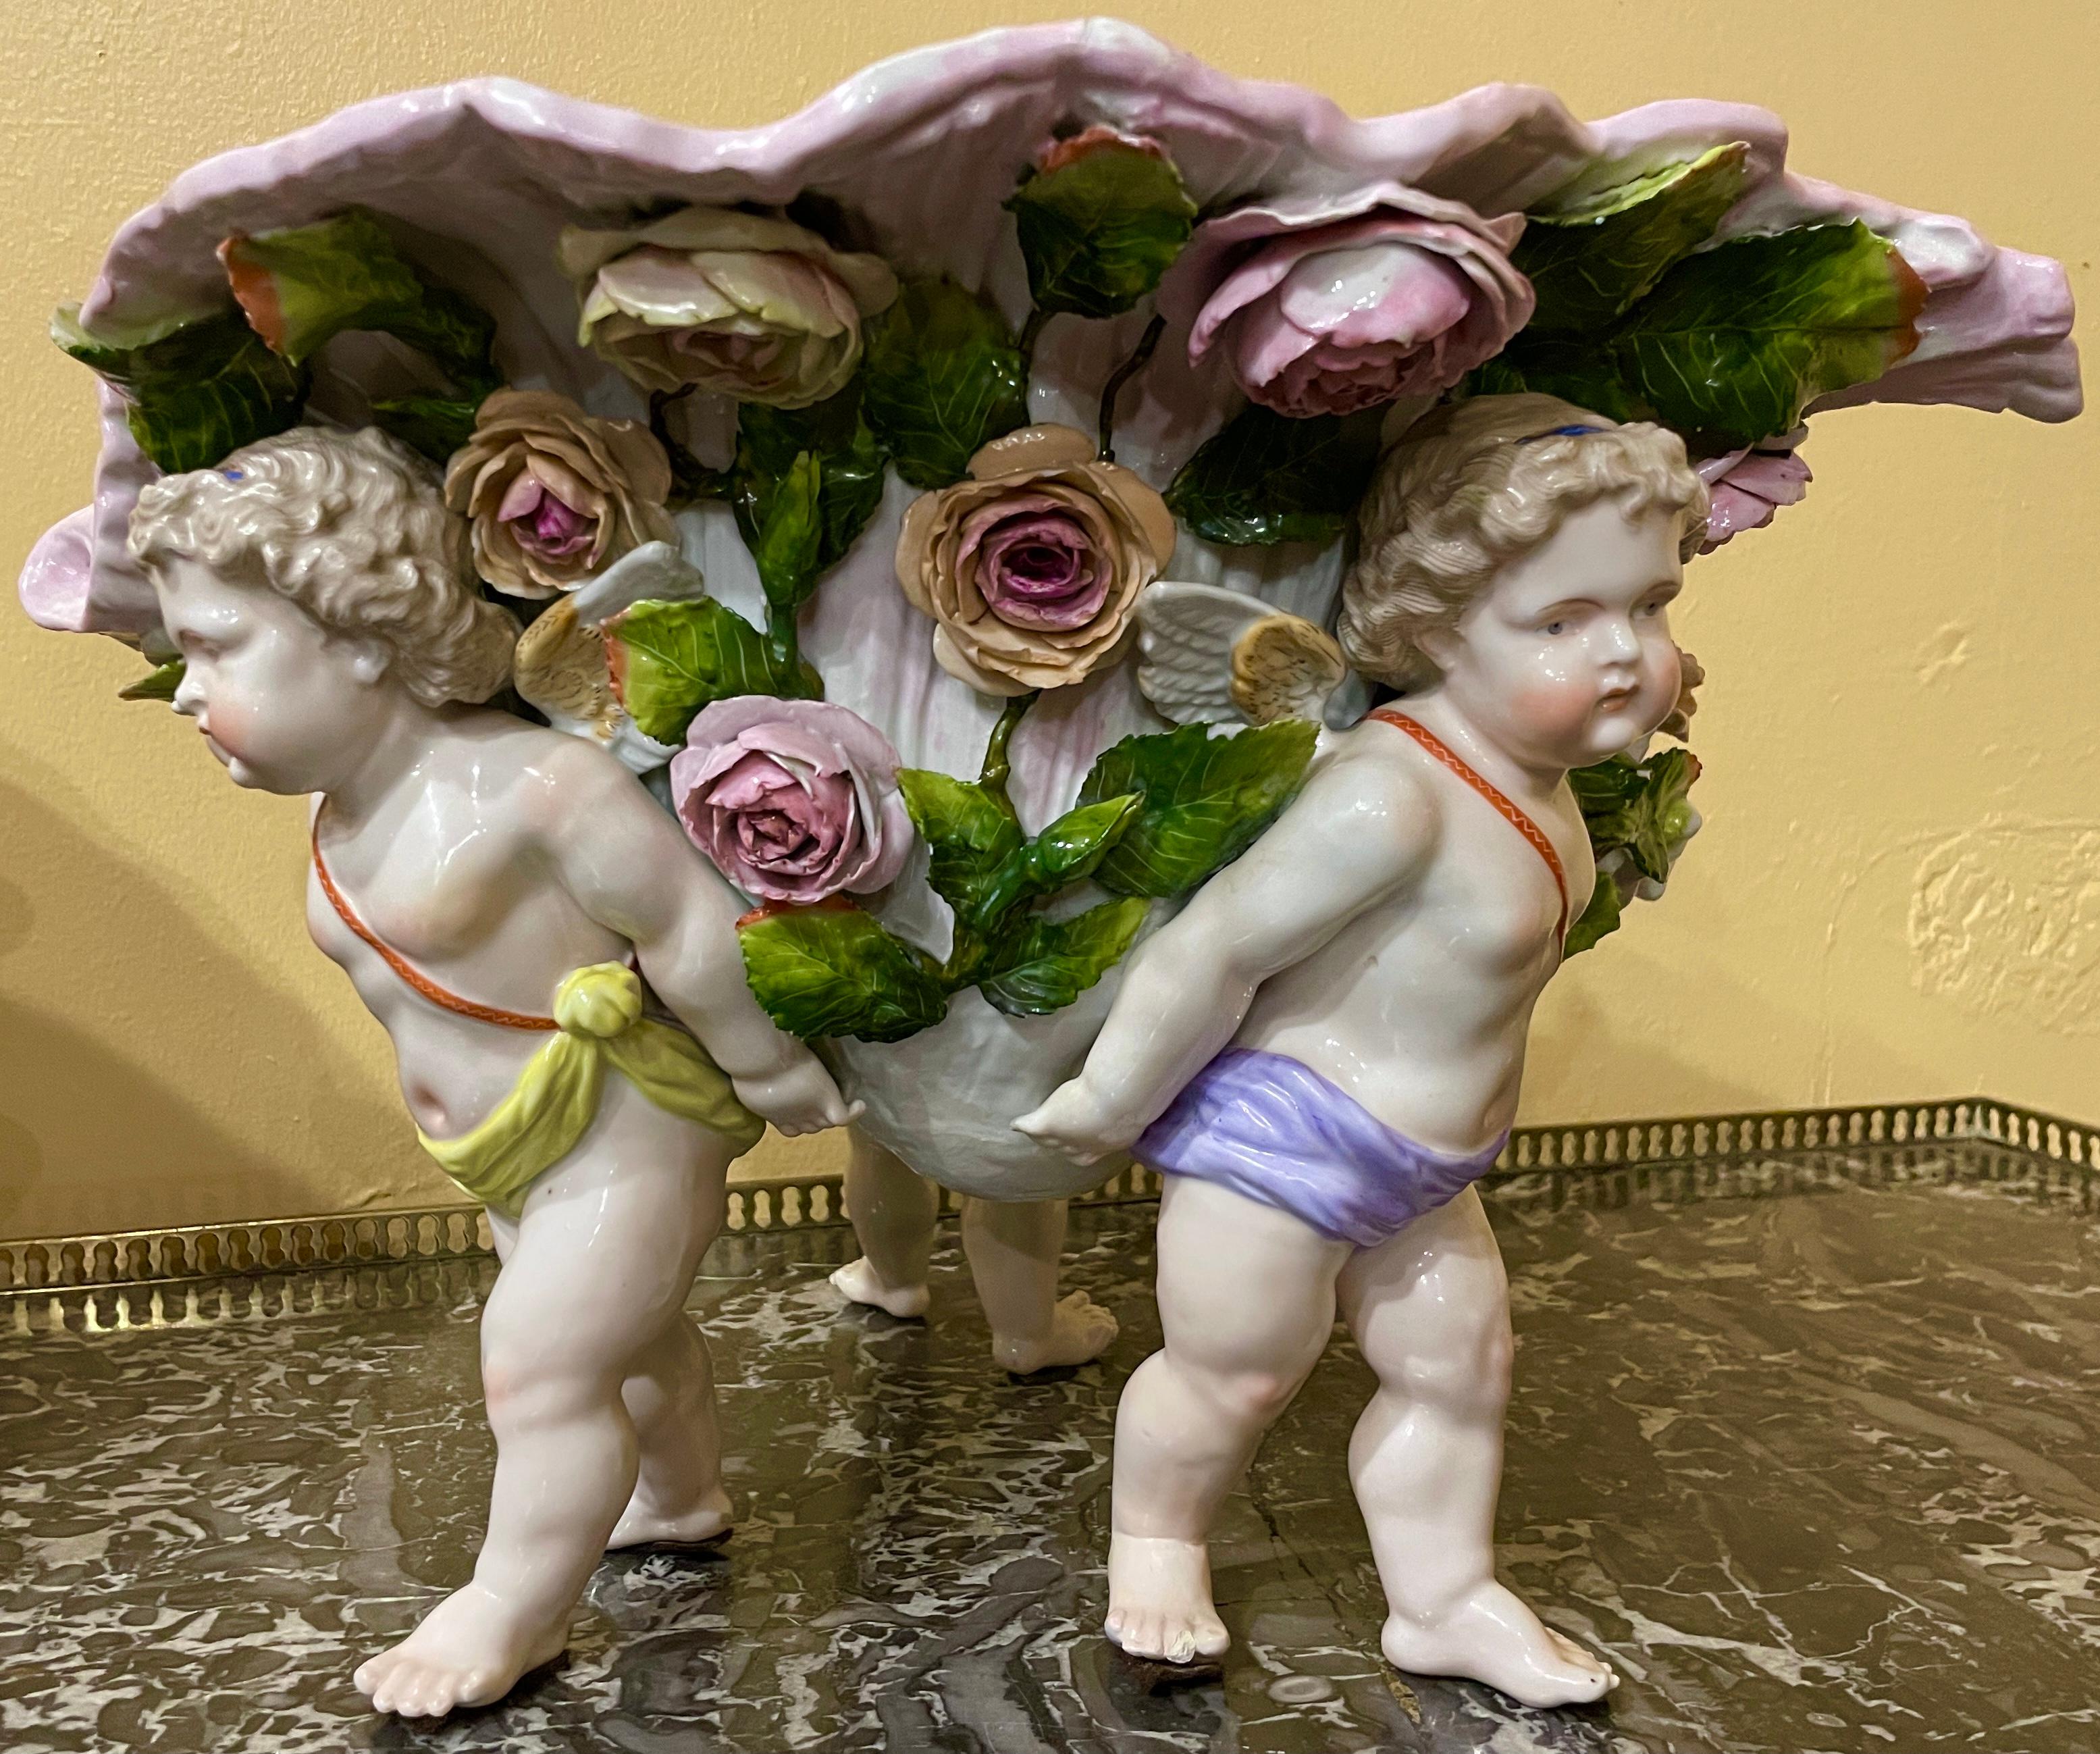 Pair antique German Dresden porcelain hand-painted shell centerpieces, Circa 1890's.
Conch shell motif with winged cherubs and flowers.